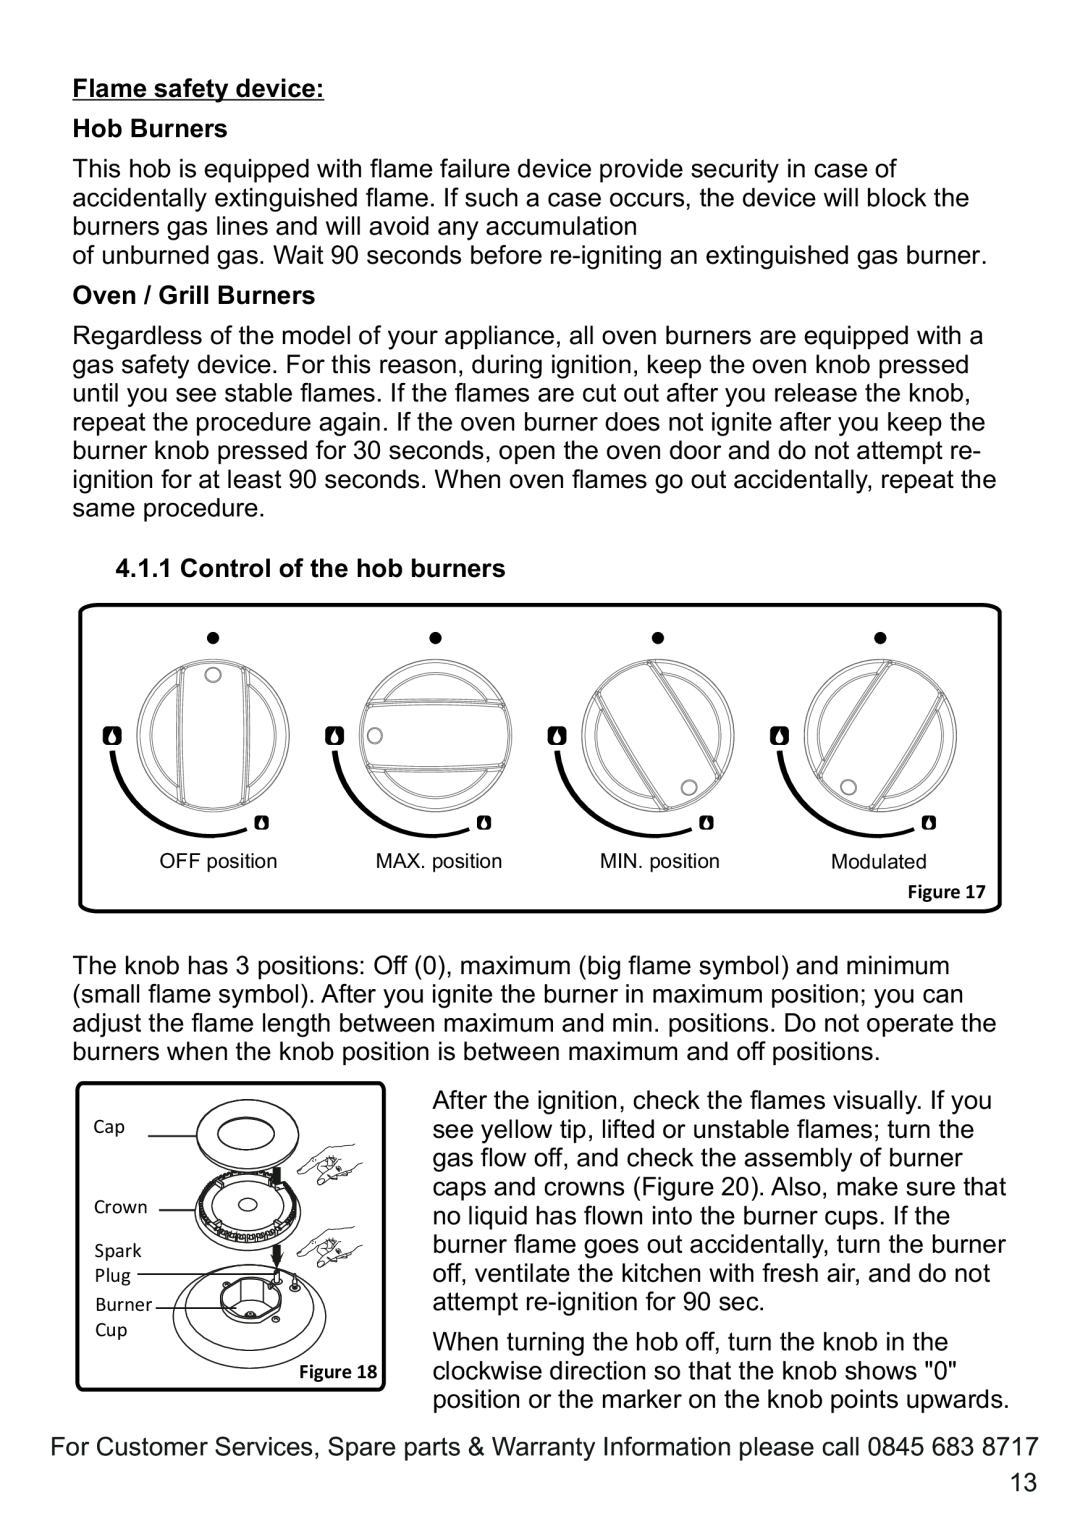 Russell Hobbs RHGC1 instruction manual Flame safety device Hob Burners, Oven / Grill Burners, Control of the hob burners 